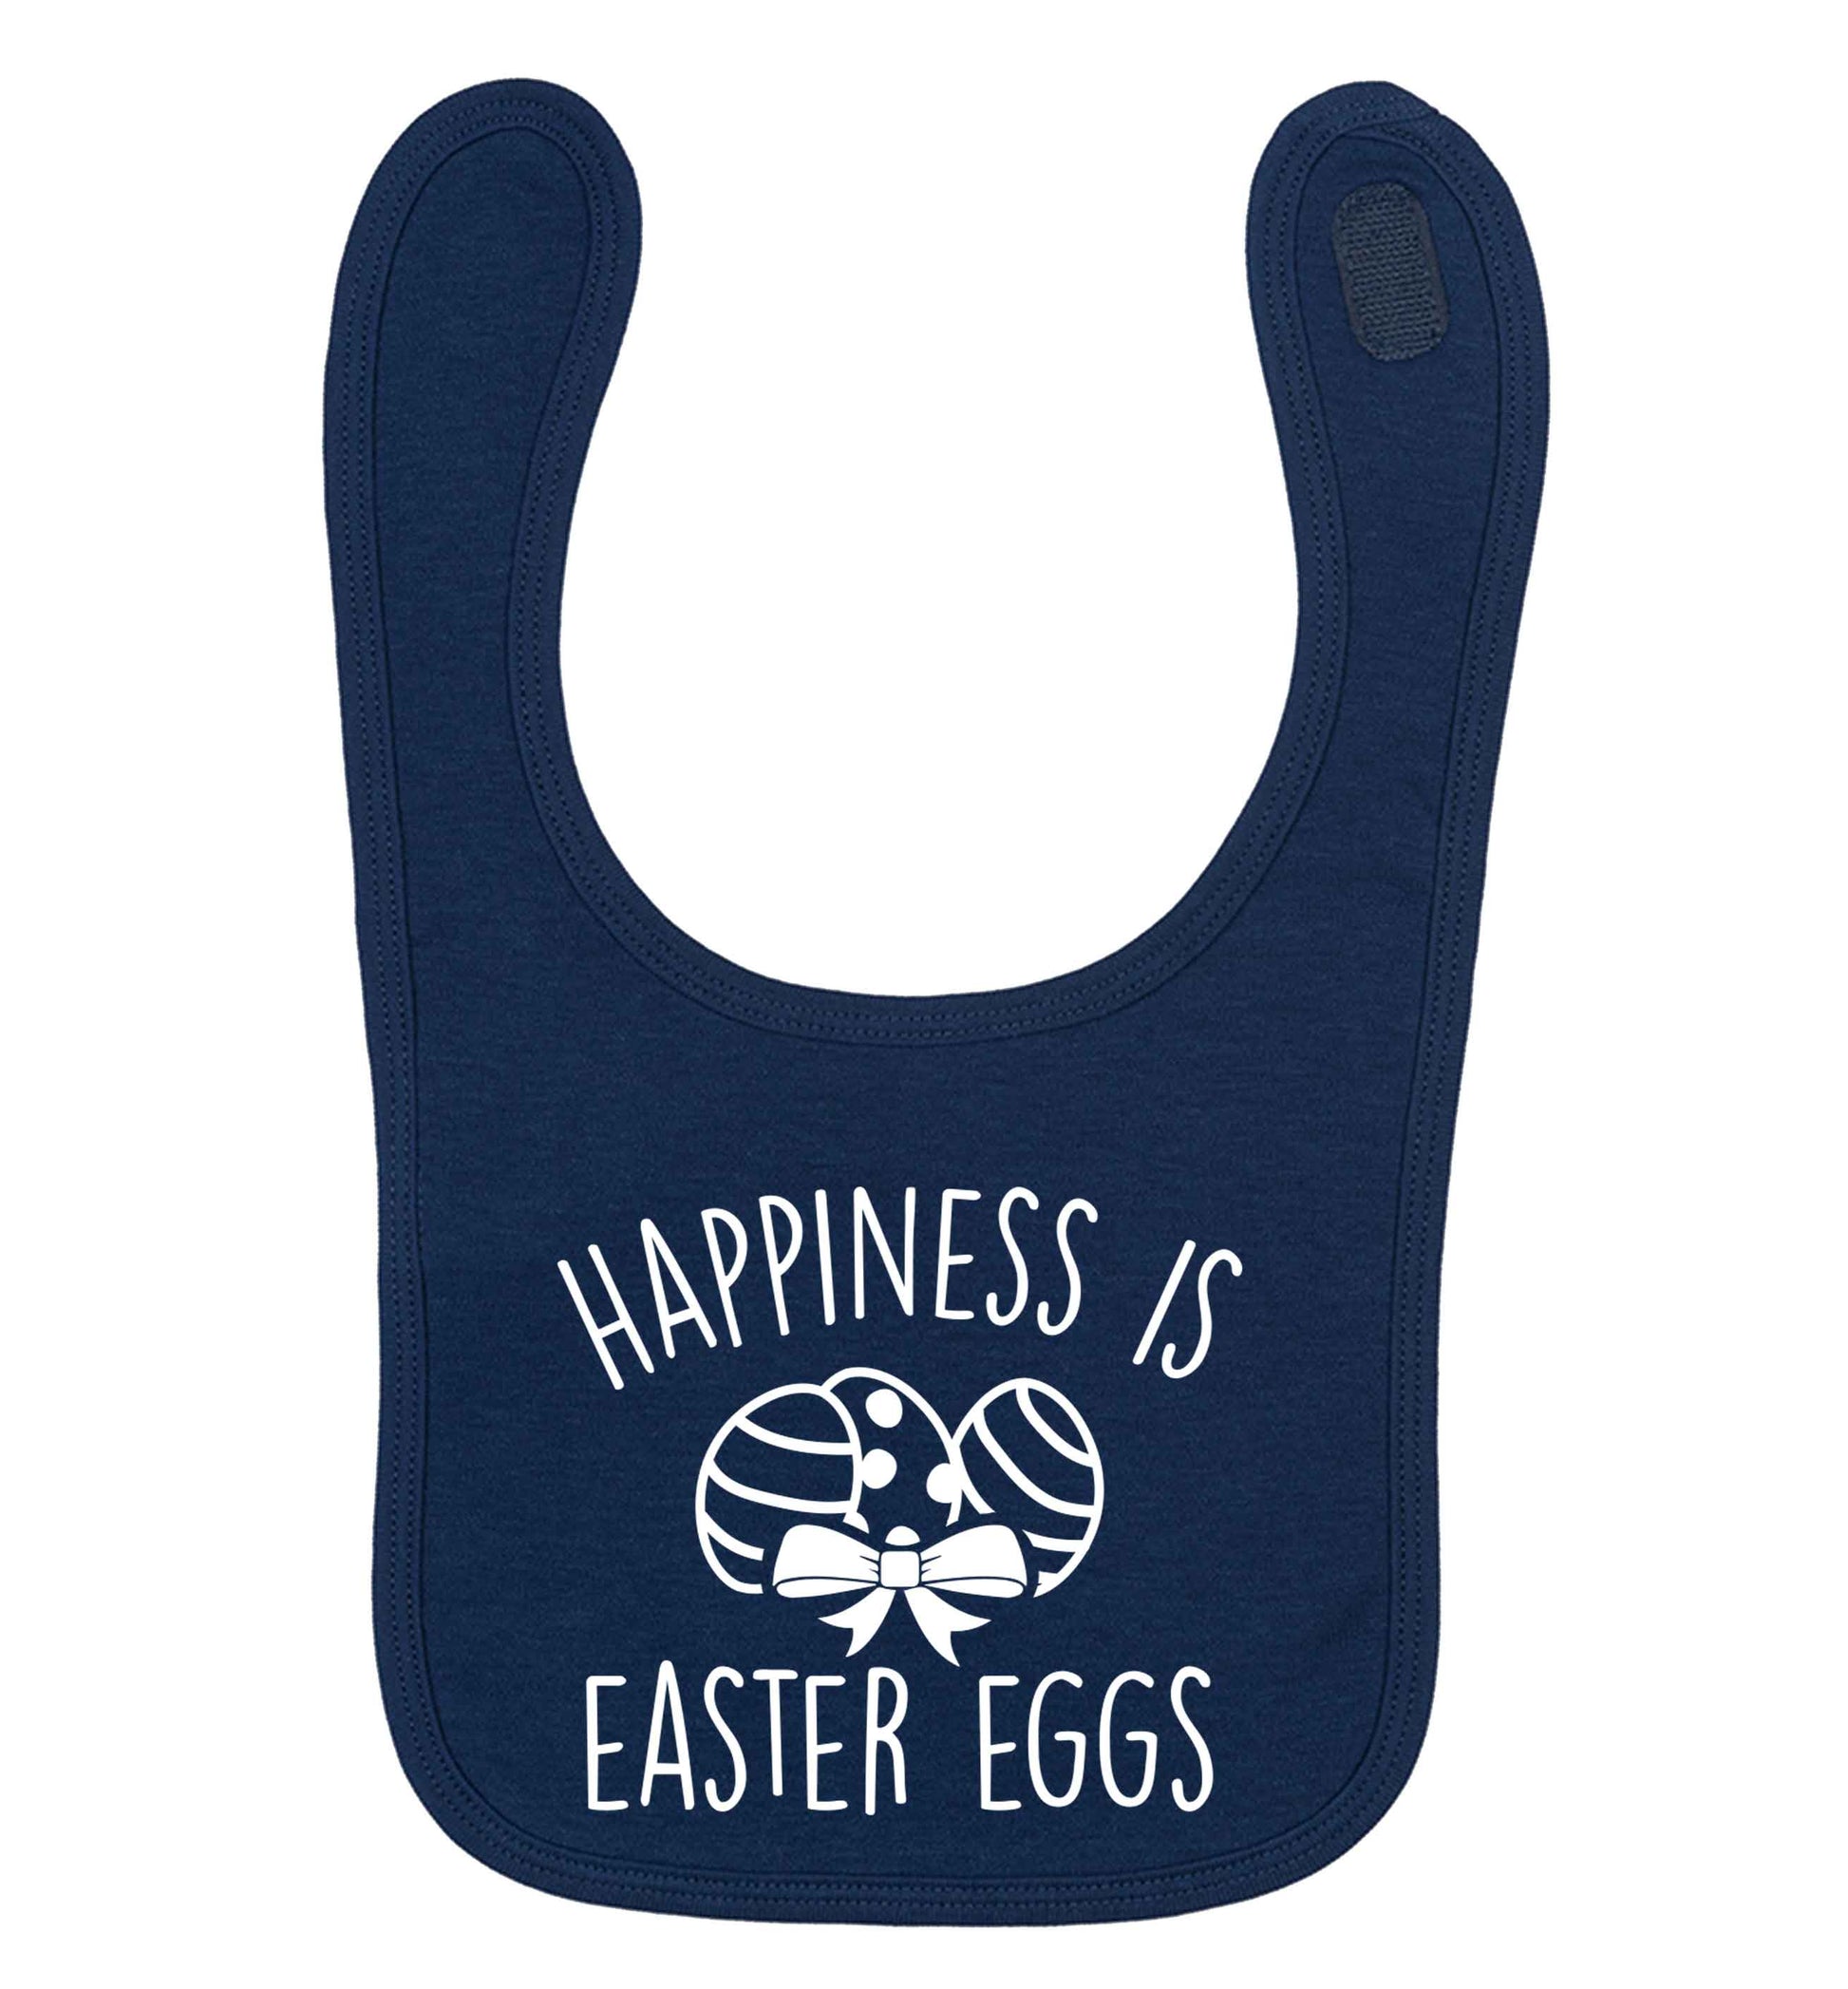 Happiness is Easter eggs navy baby bib